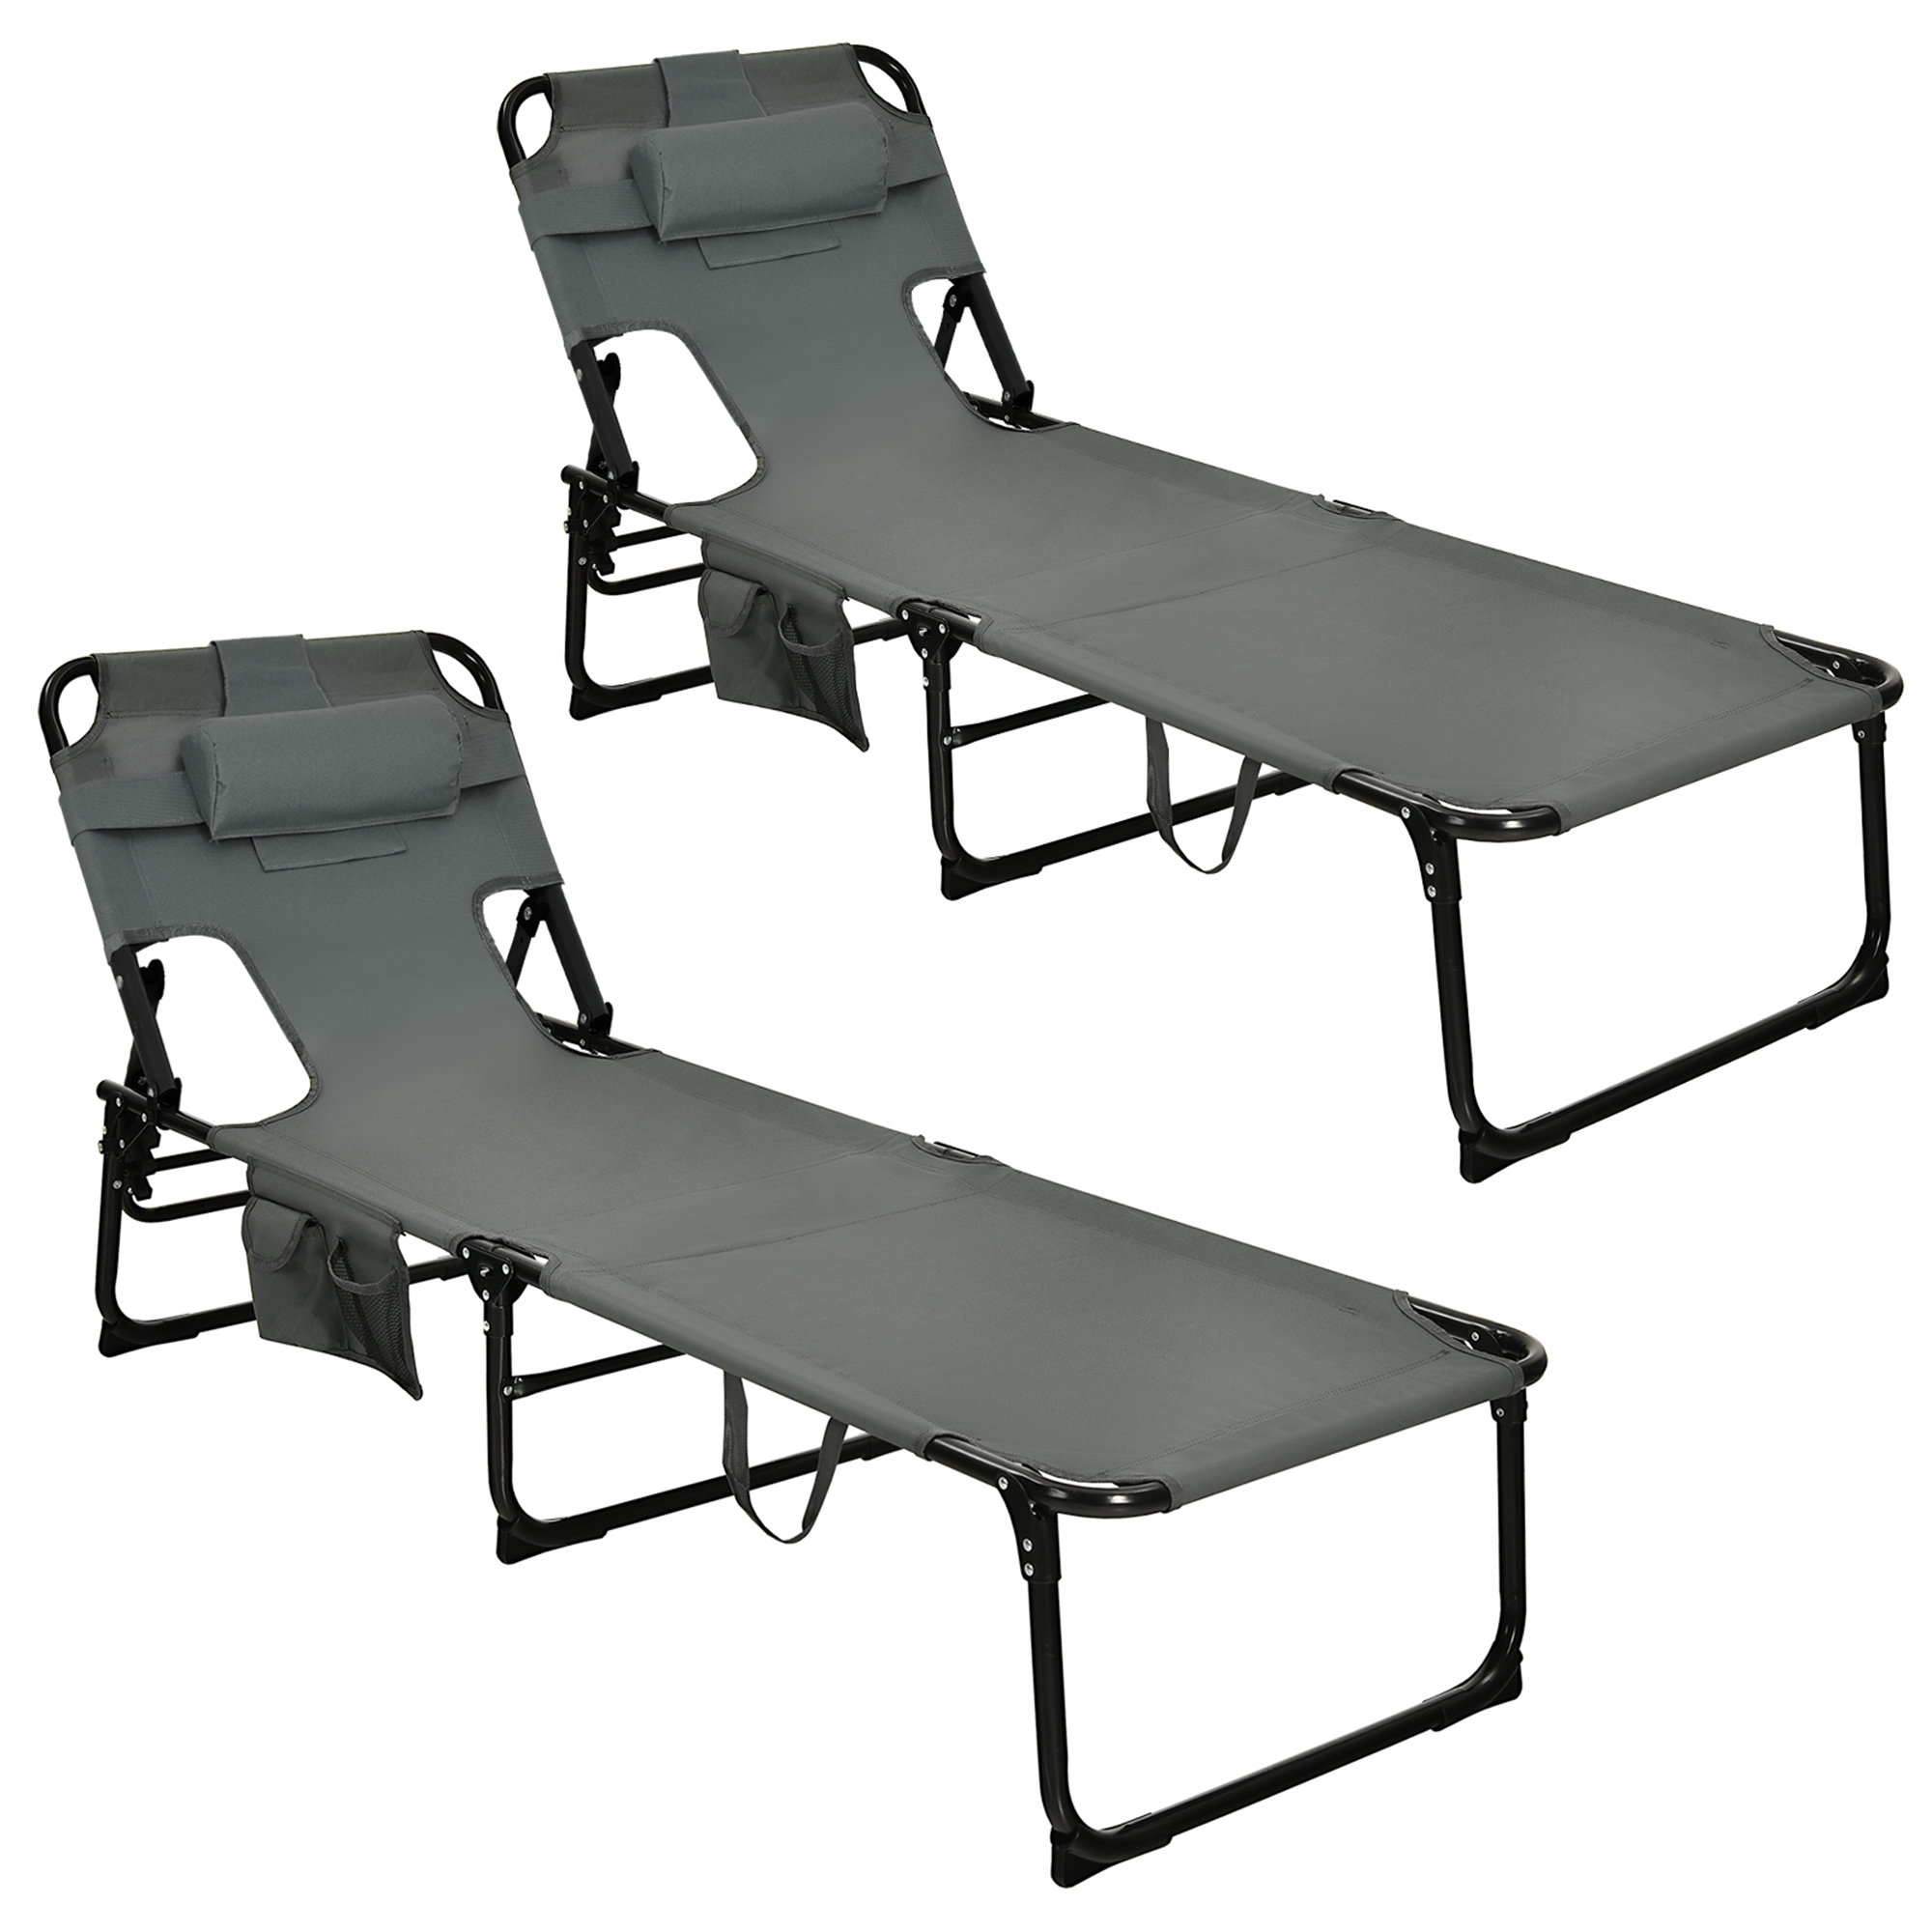 Gymax Set of 2 Beach Chaise Lounge Chair Folding Reclining Chair w/ Facing Hole Grey - image 1 of 10